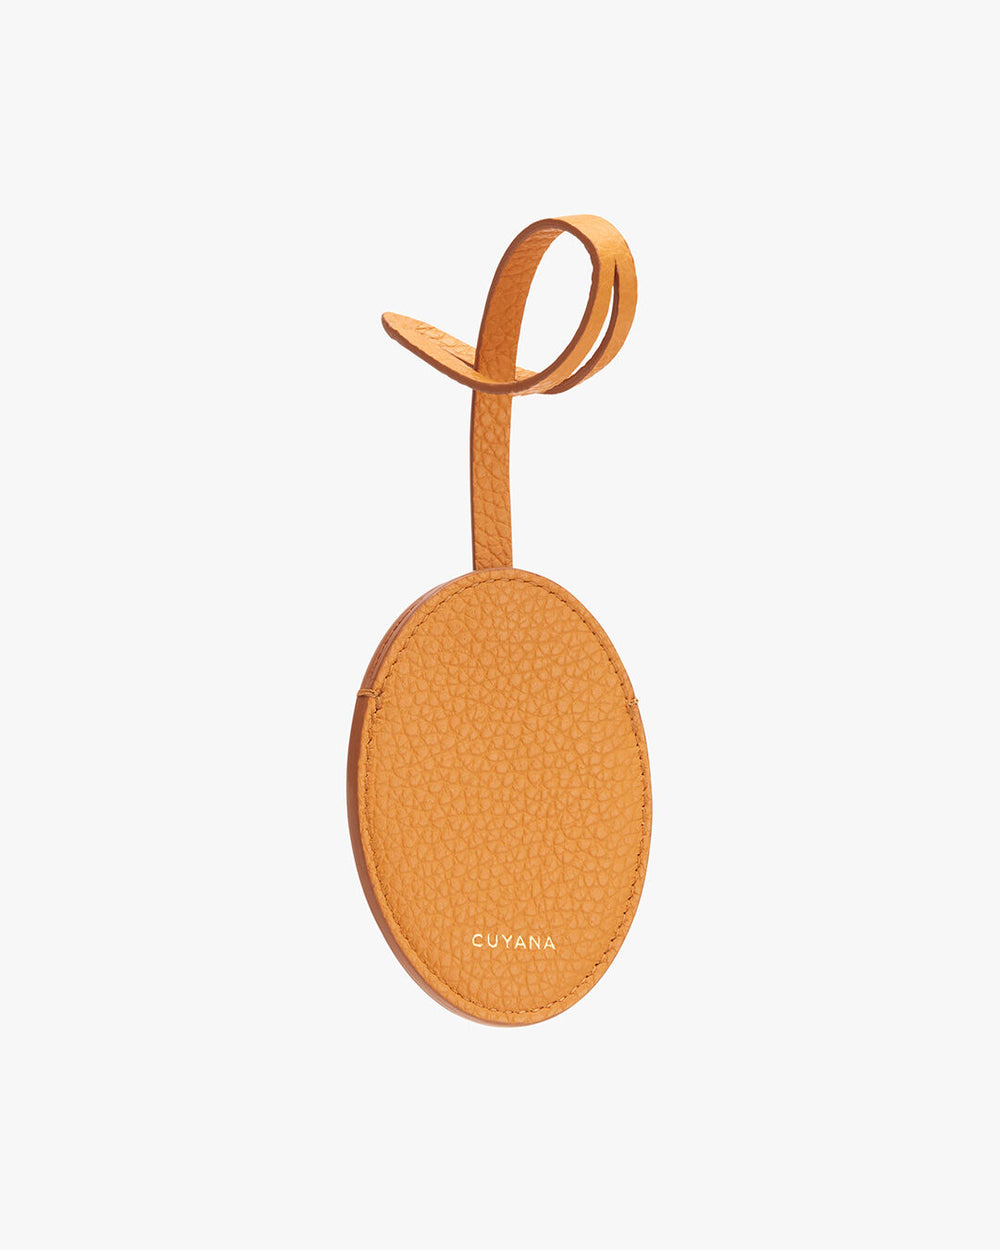 Oval-shaped tag with loop and branded text.